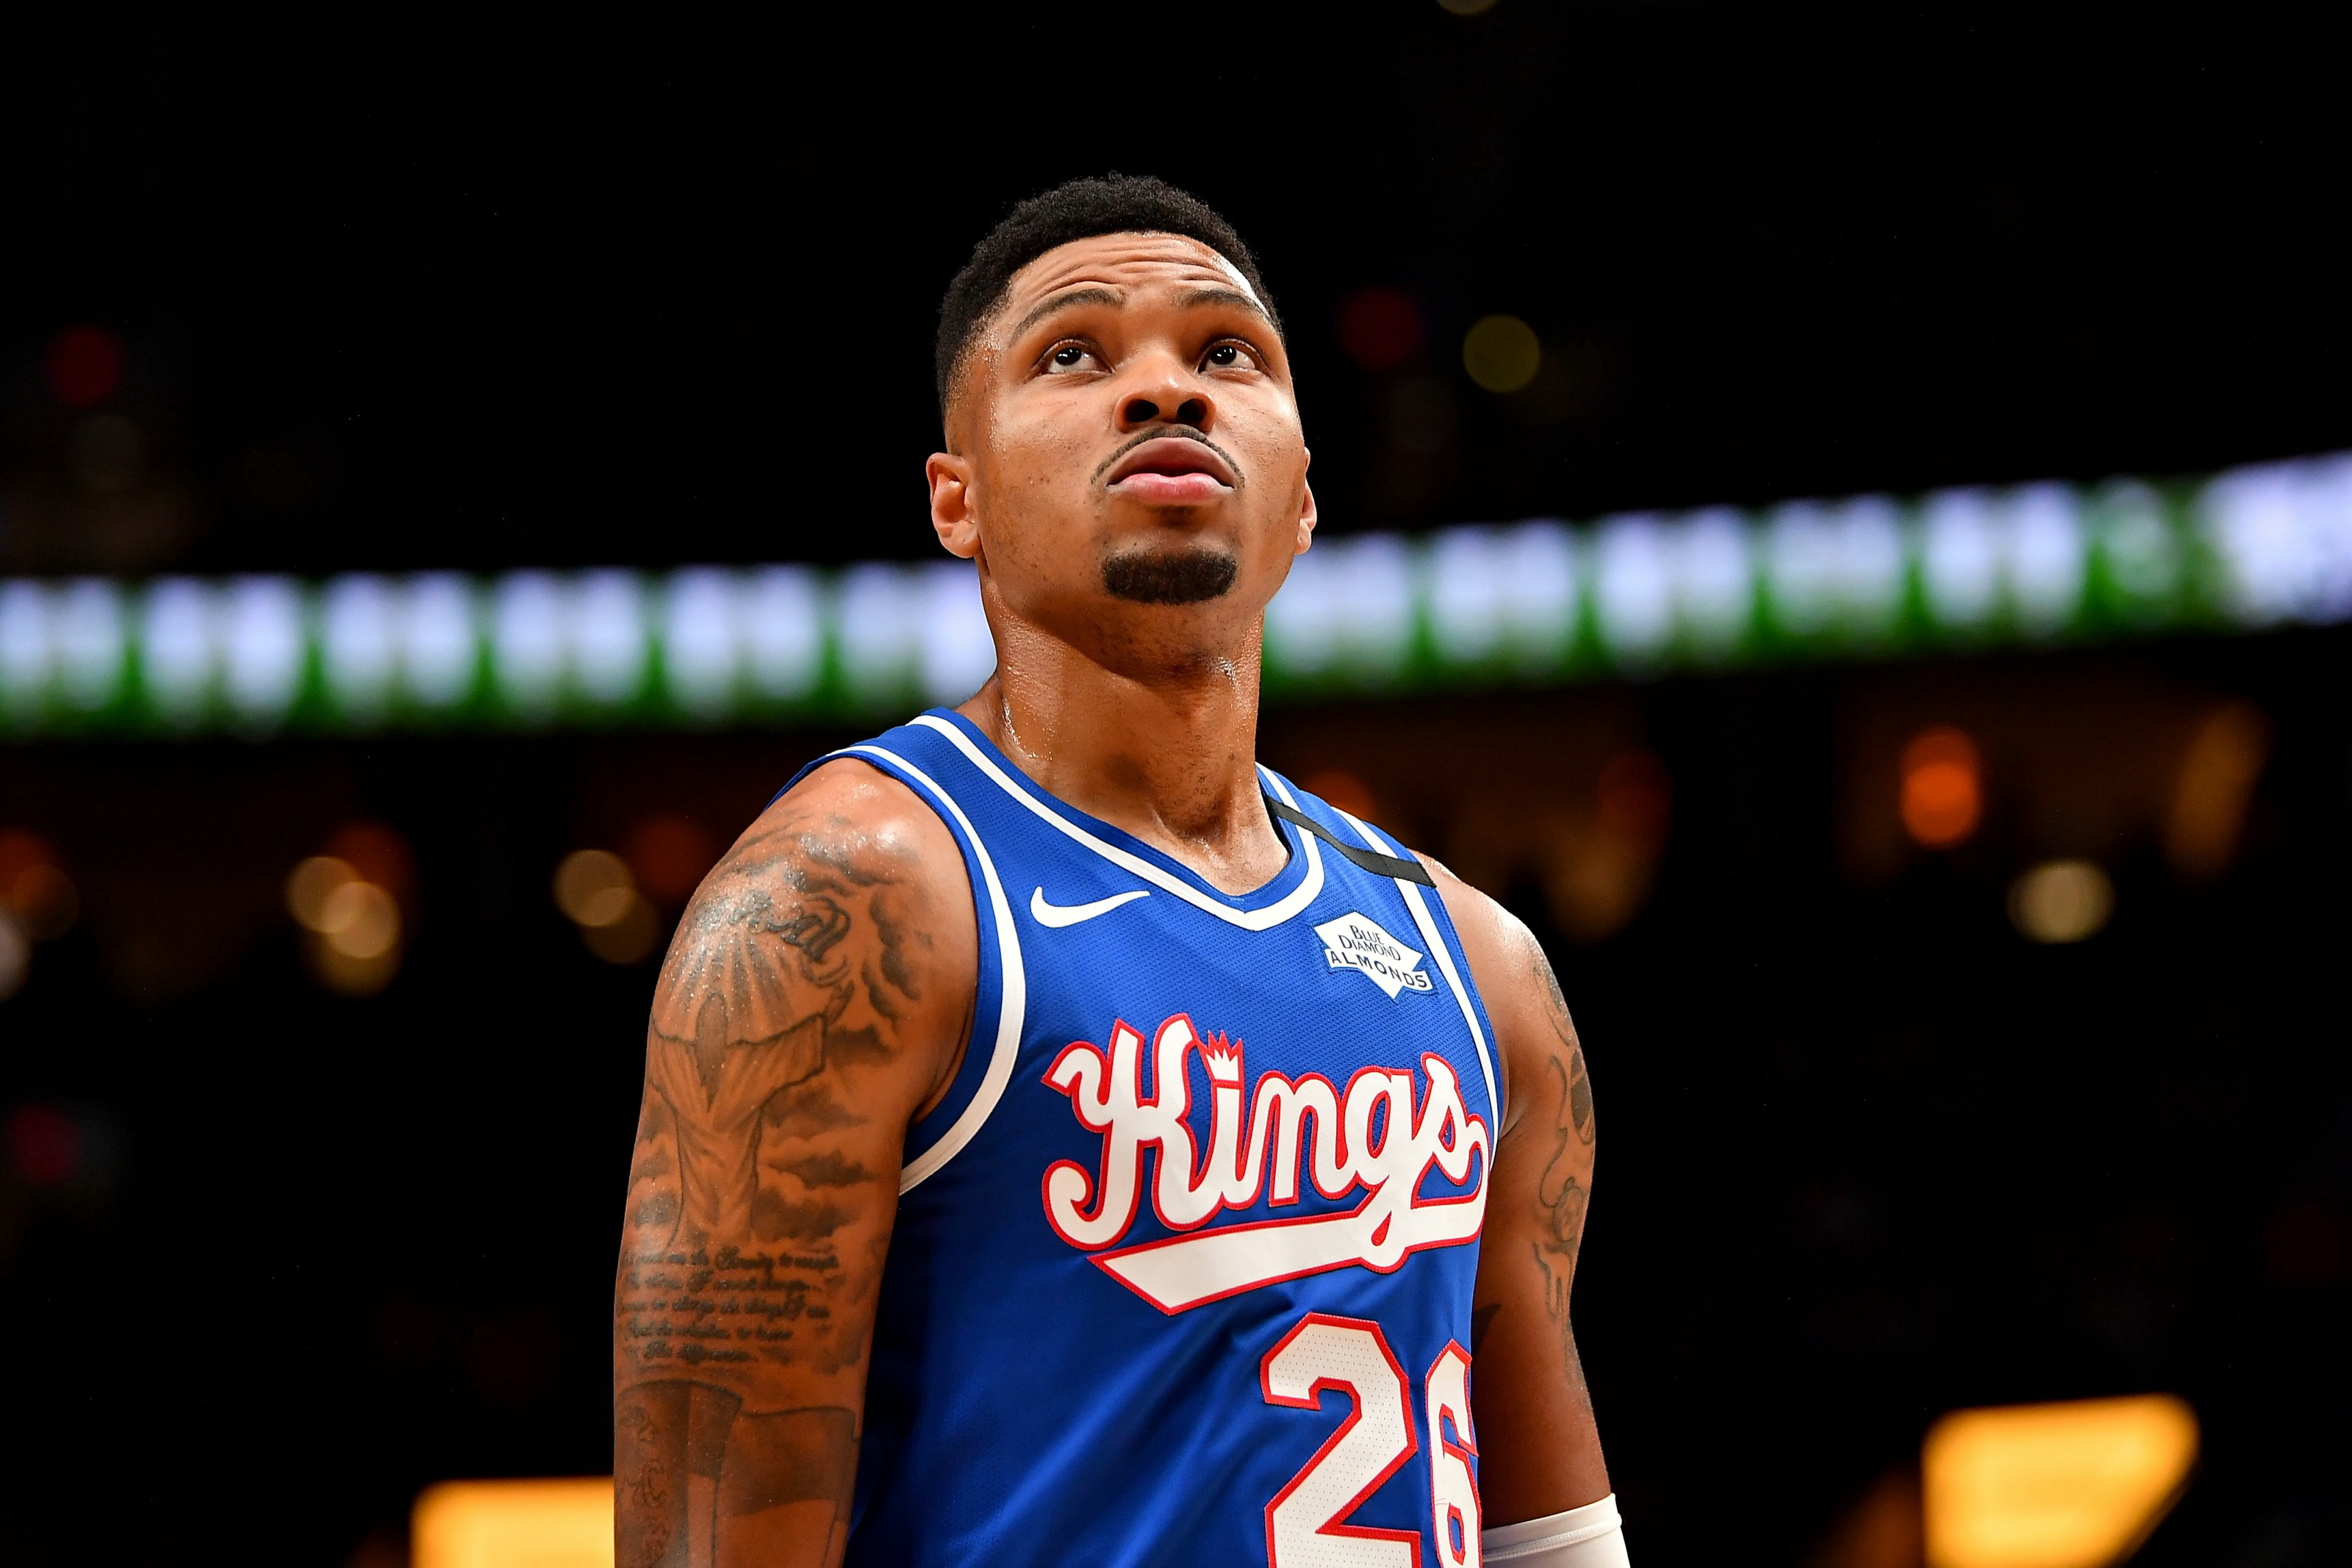 NBA Free Agency Rumors: Lakers sign Kent Bazemore to a one-year